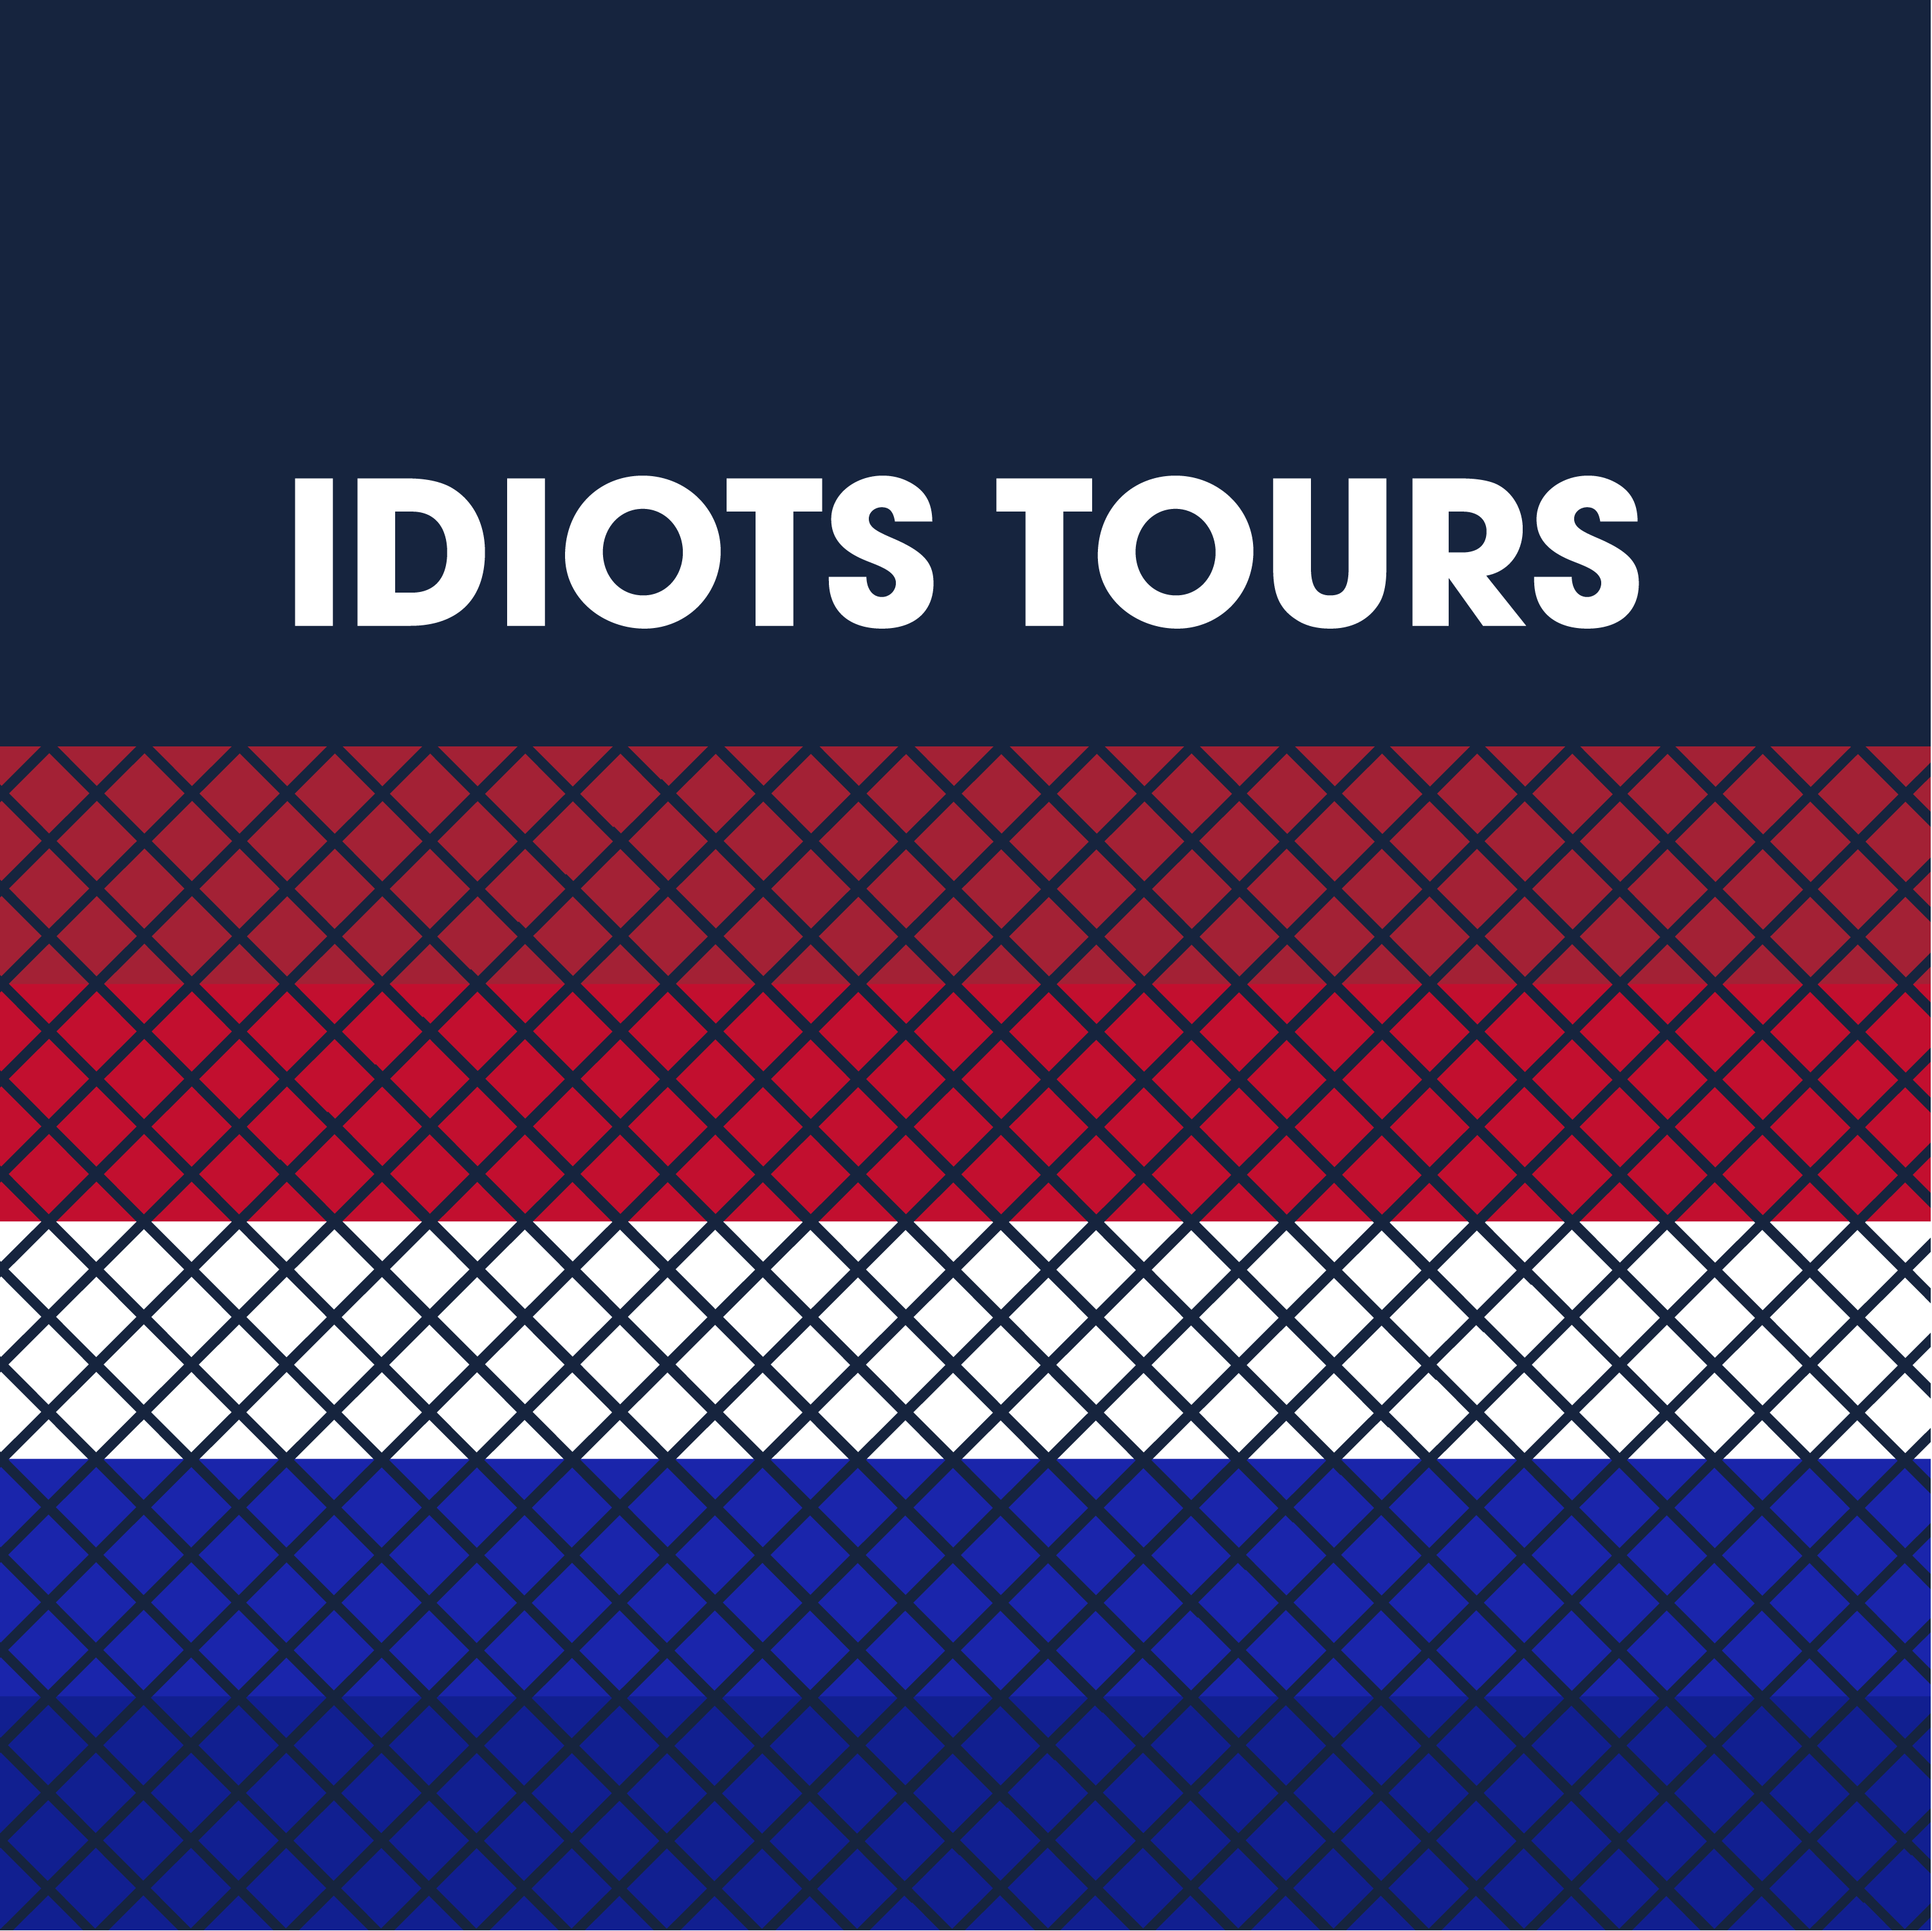 Club Image for IDIOT TOURS